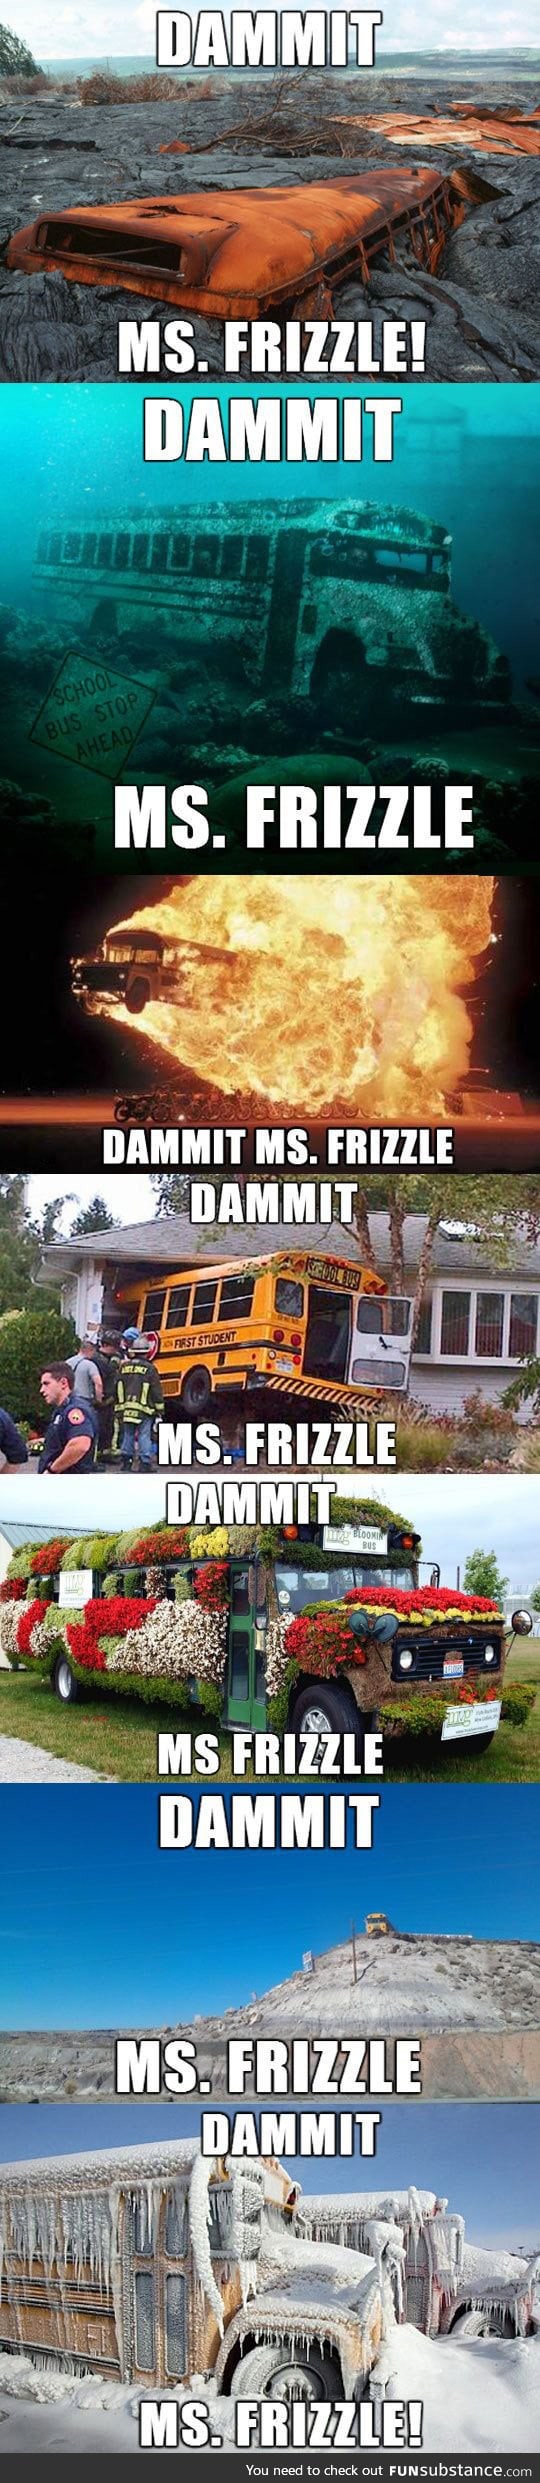 Ms. Frizzle is at it again